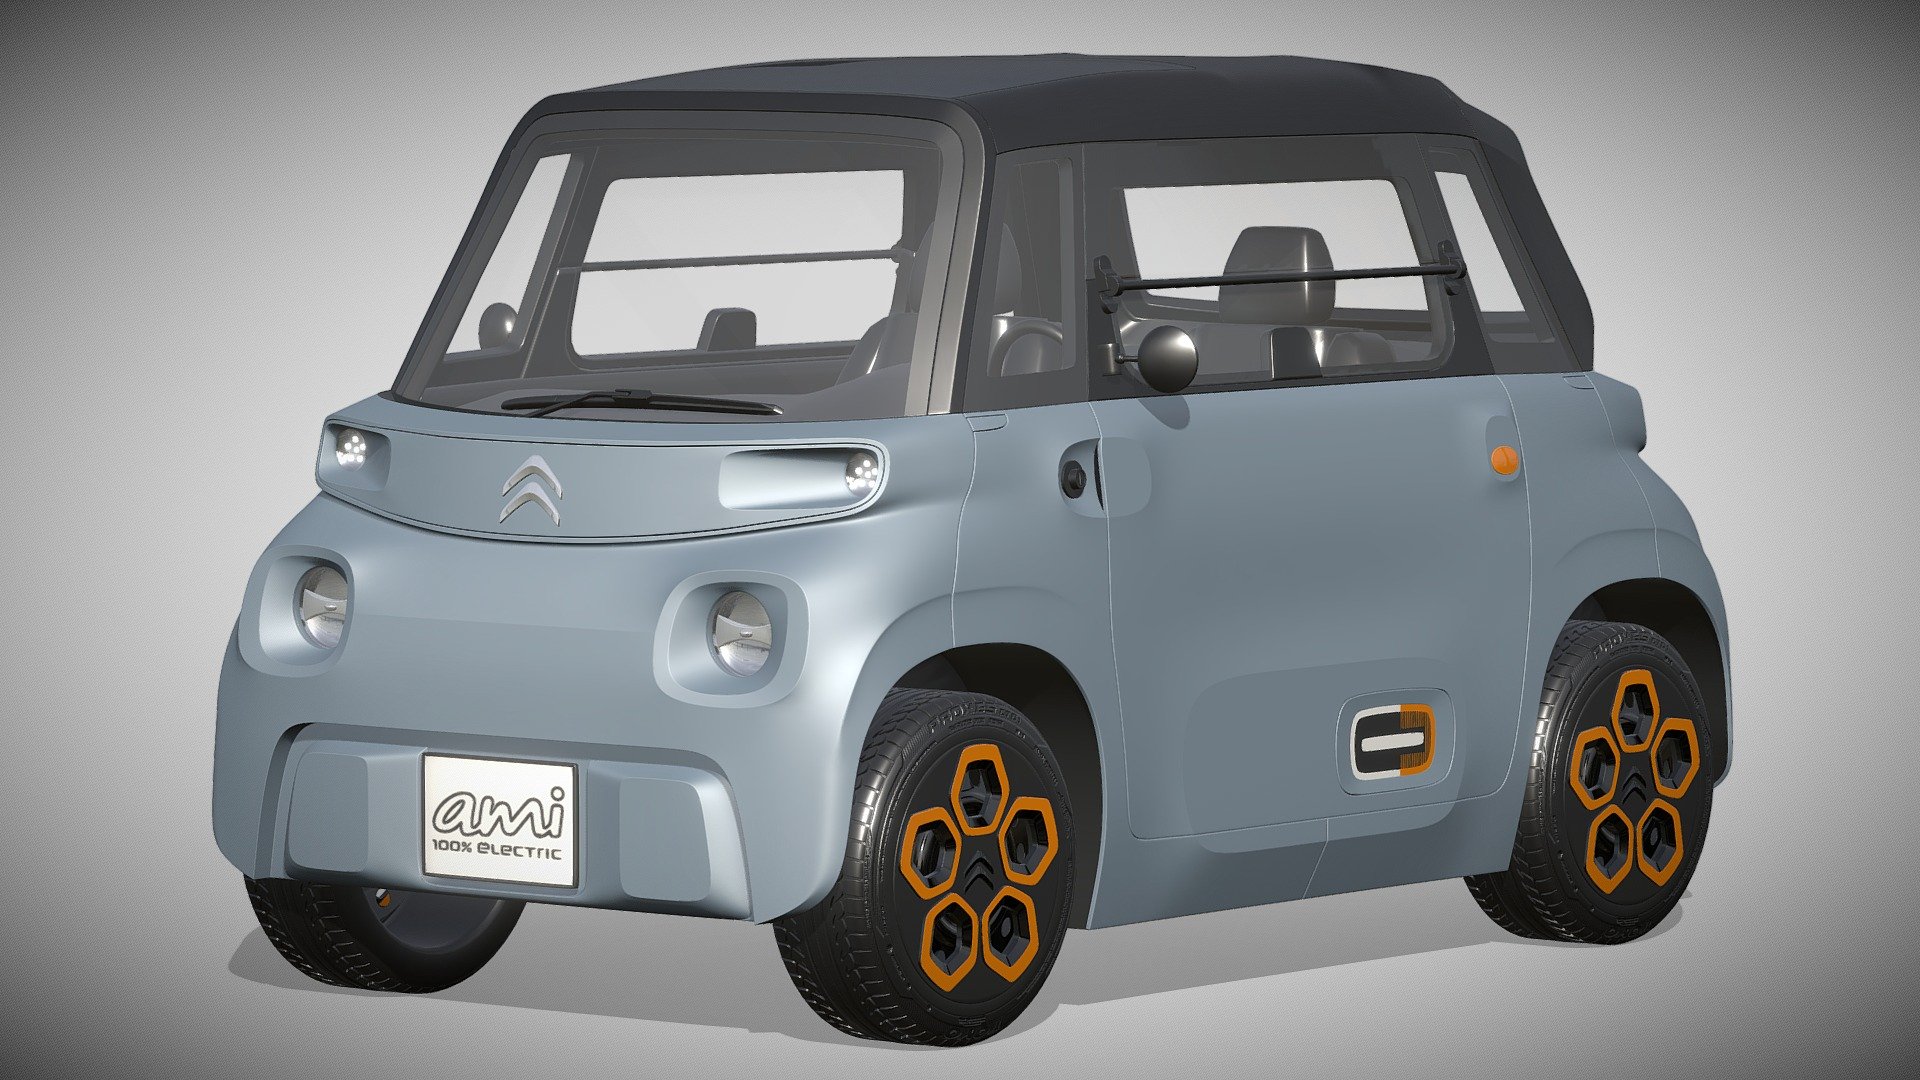 Citroen Ami

https://www.citroen.fr/ami

Clean geometry Light weight model, yet completely detailed for HI-Res renders. Use for movies, Advertisements or games

Corona render and materials

All textures include in *.rar files

Lighting setup is not included in the file! - Citroen Ami - Buy Royalty Free 3D model by zifir3d 3d model